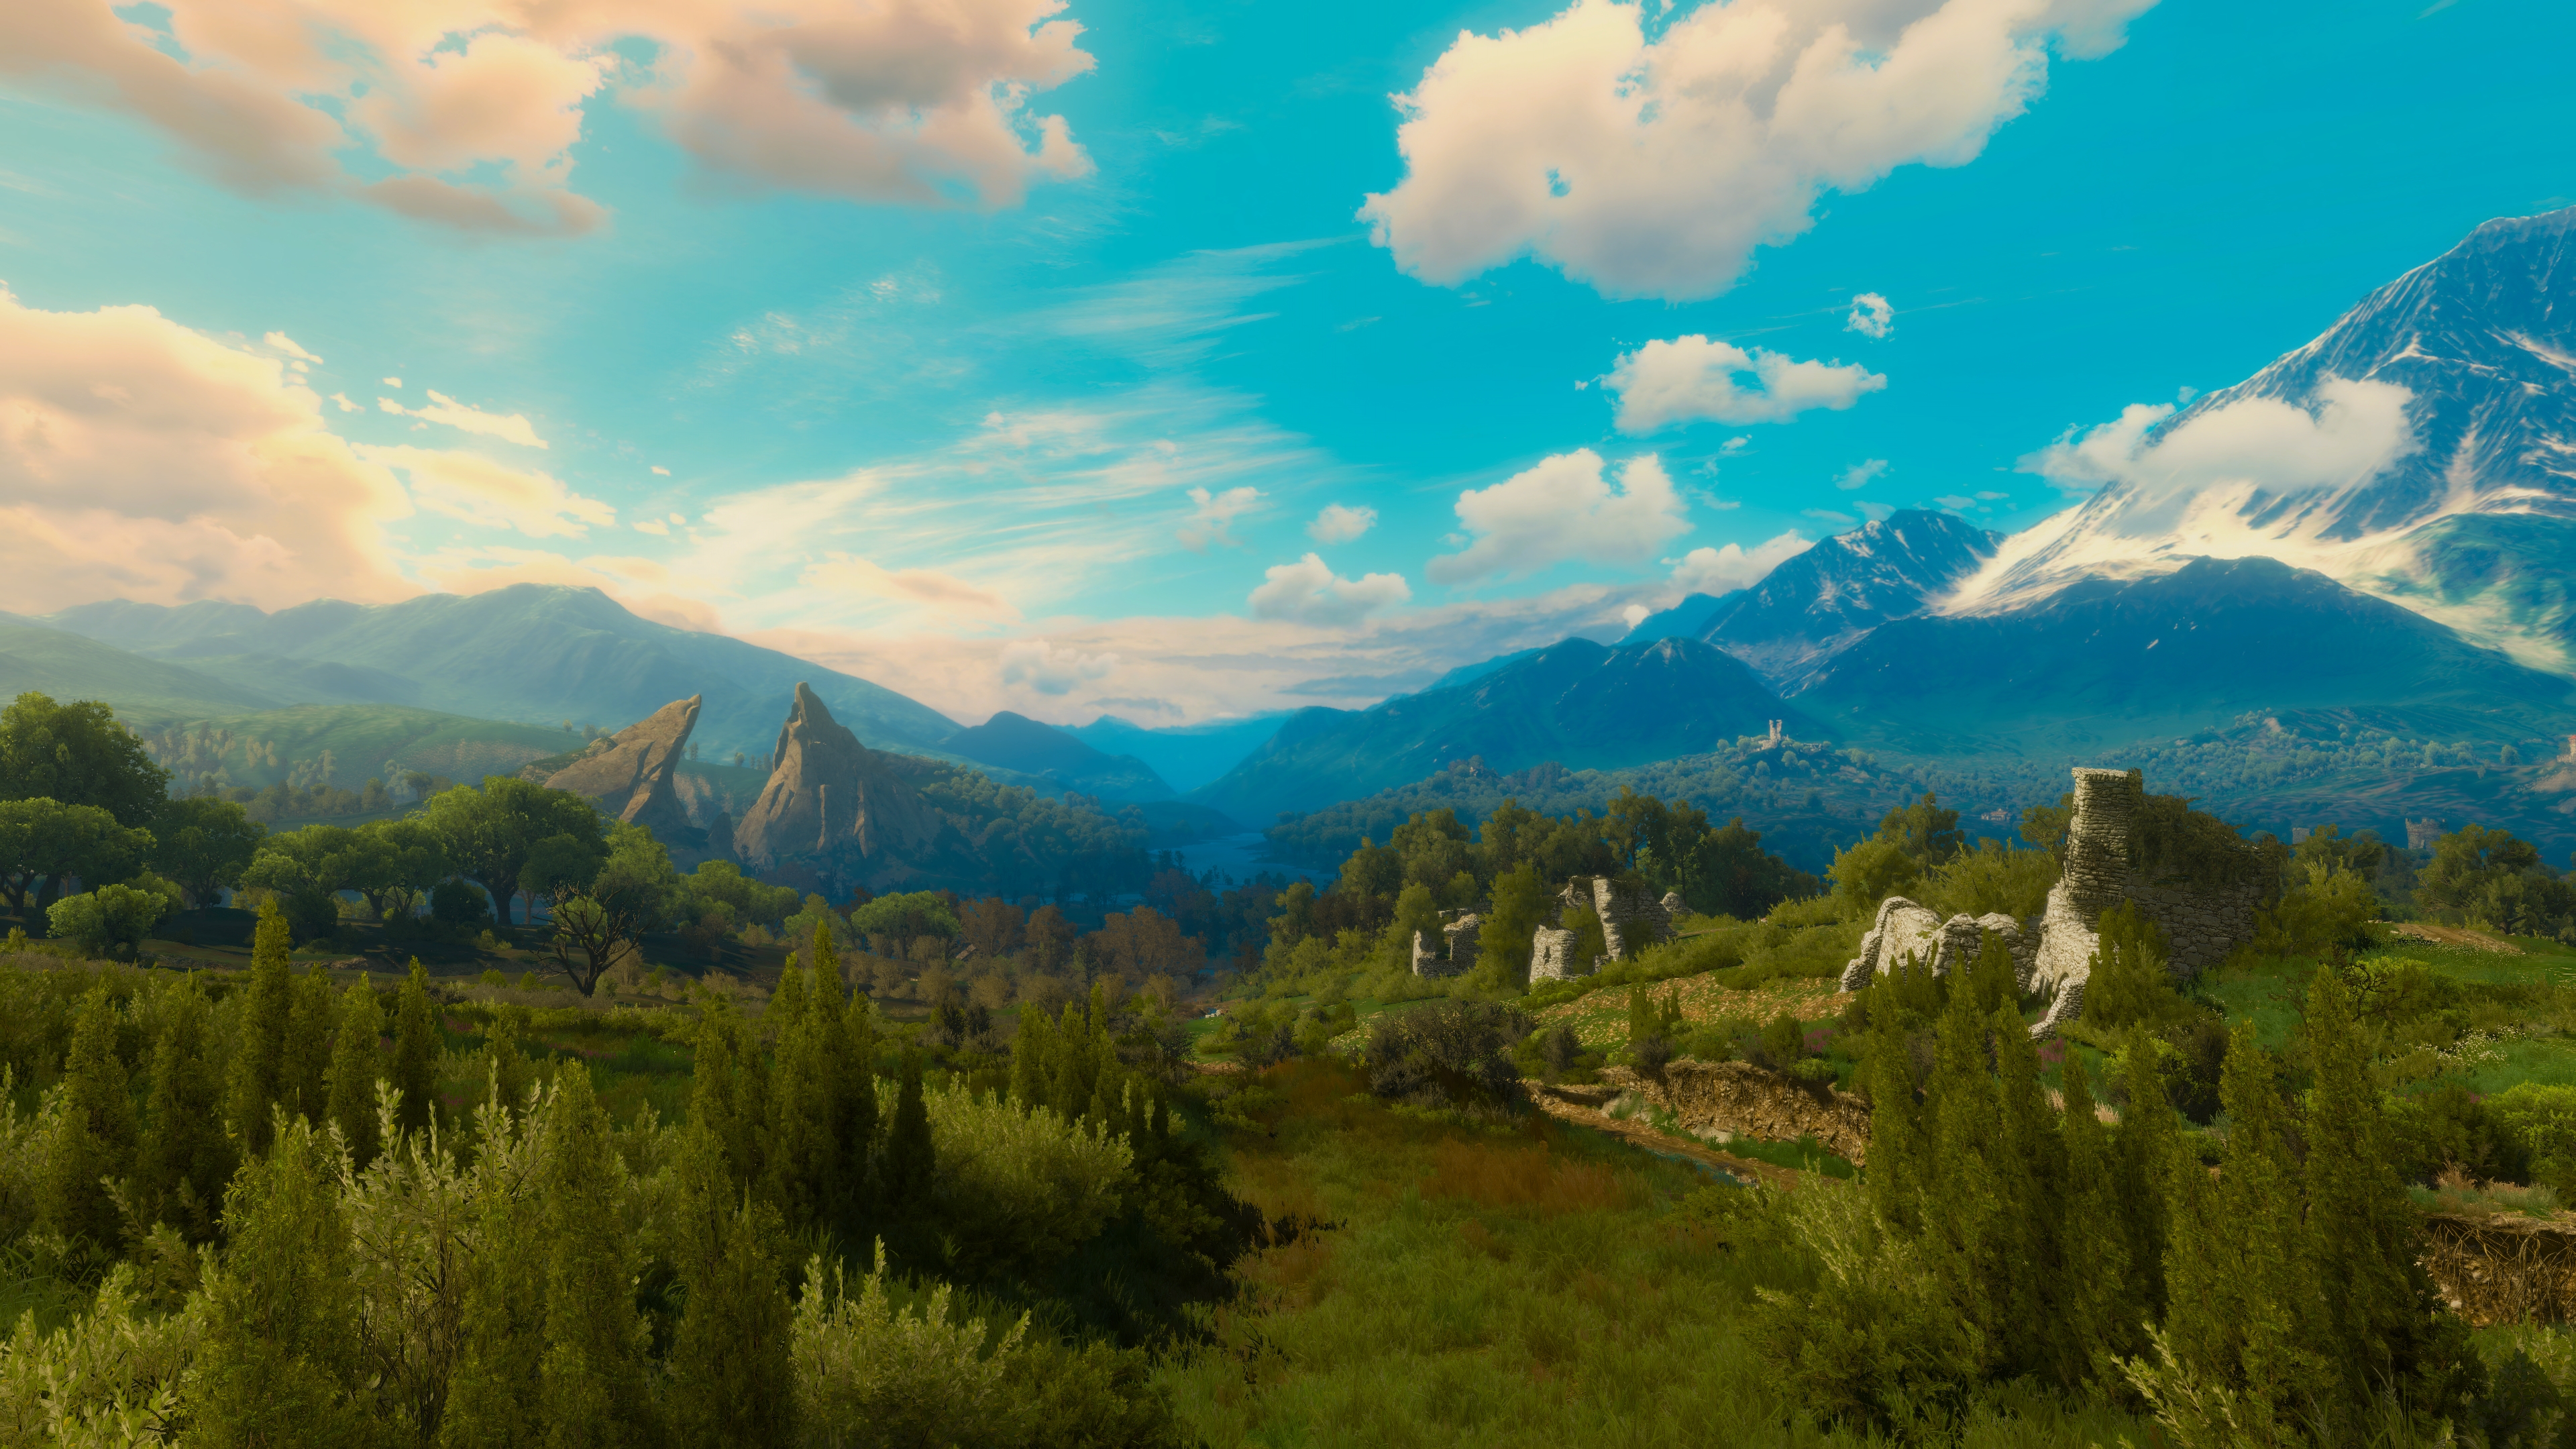 General 3840x2160 The Witcher 3: Wild Hunt screen shot PC gaming tussent landscape The Witcher video games video game art sunlight clouds sky trees mountains CGI